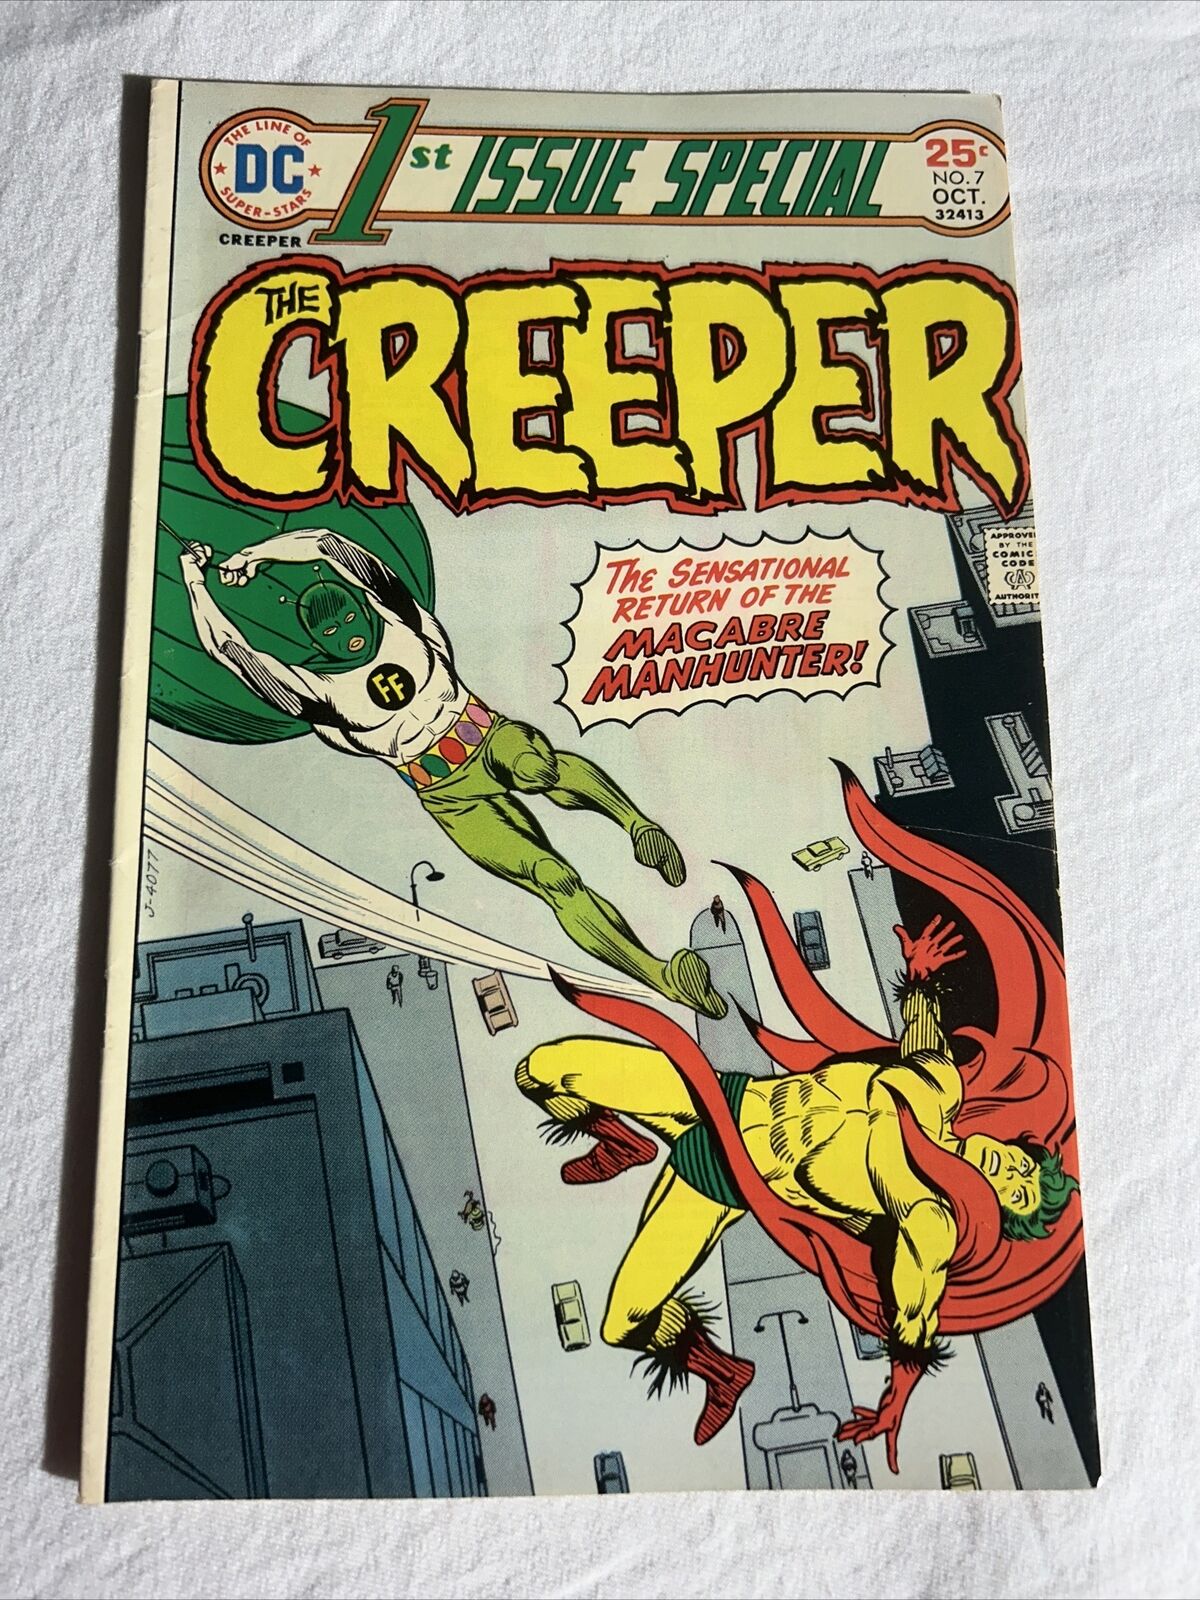 DC 1st Issue Special #7 (1975) Bronze Age Creeper 🌟SEE PICS🌟